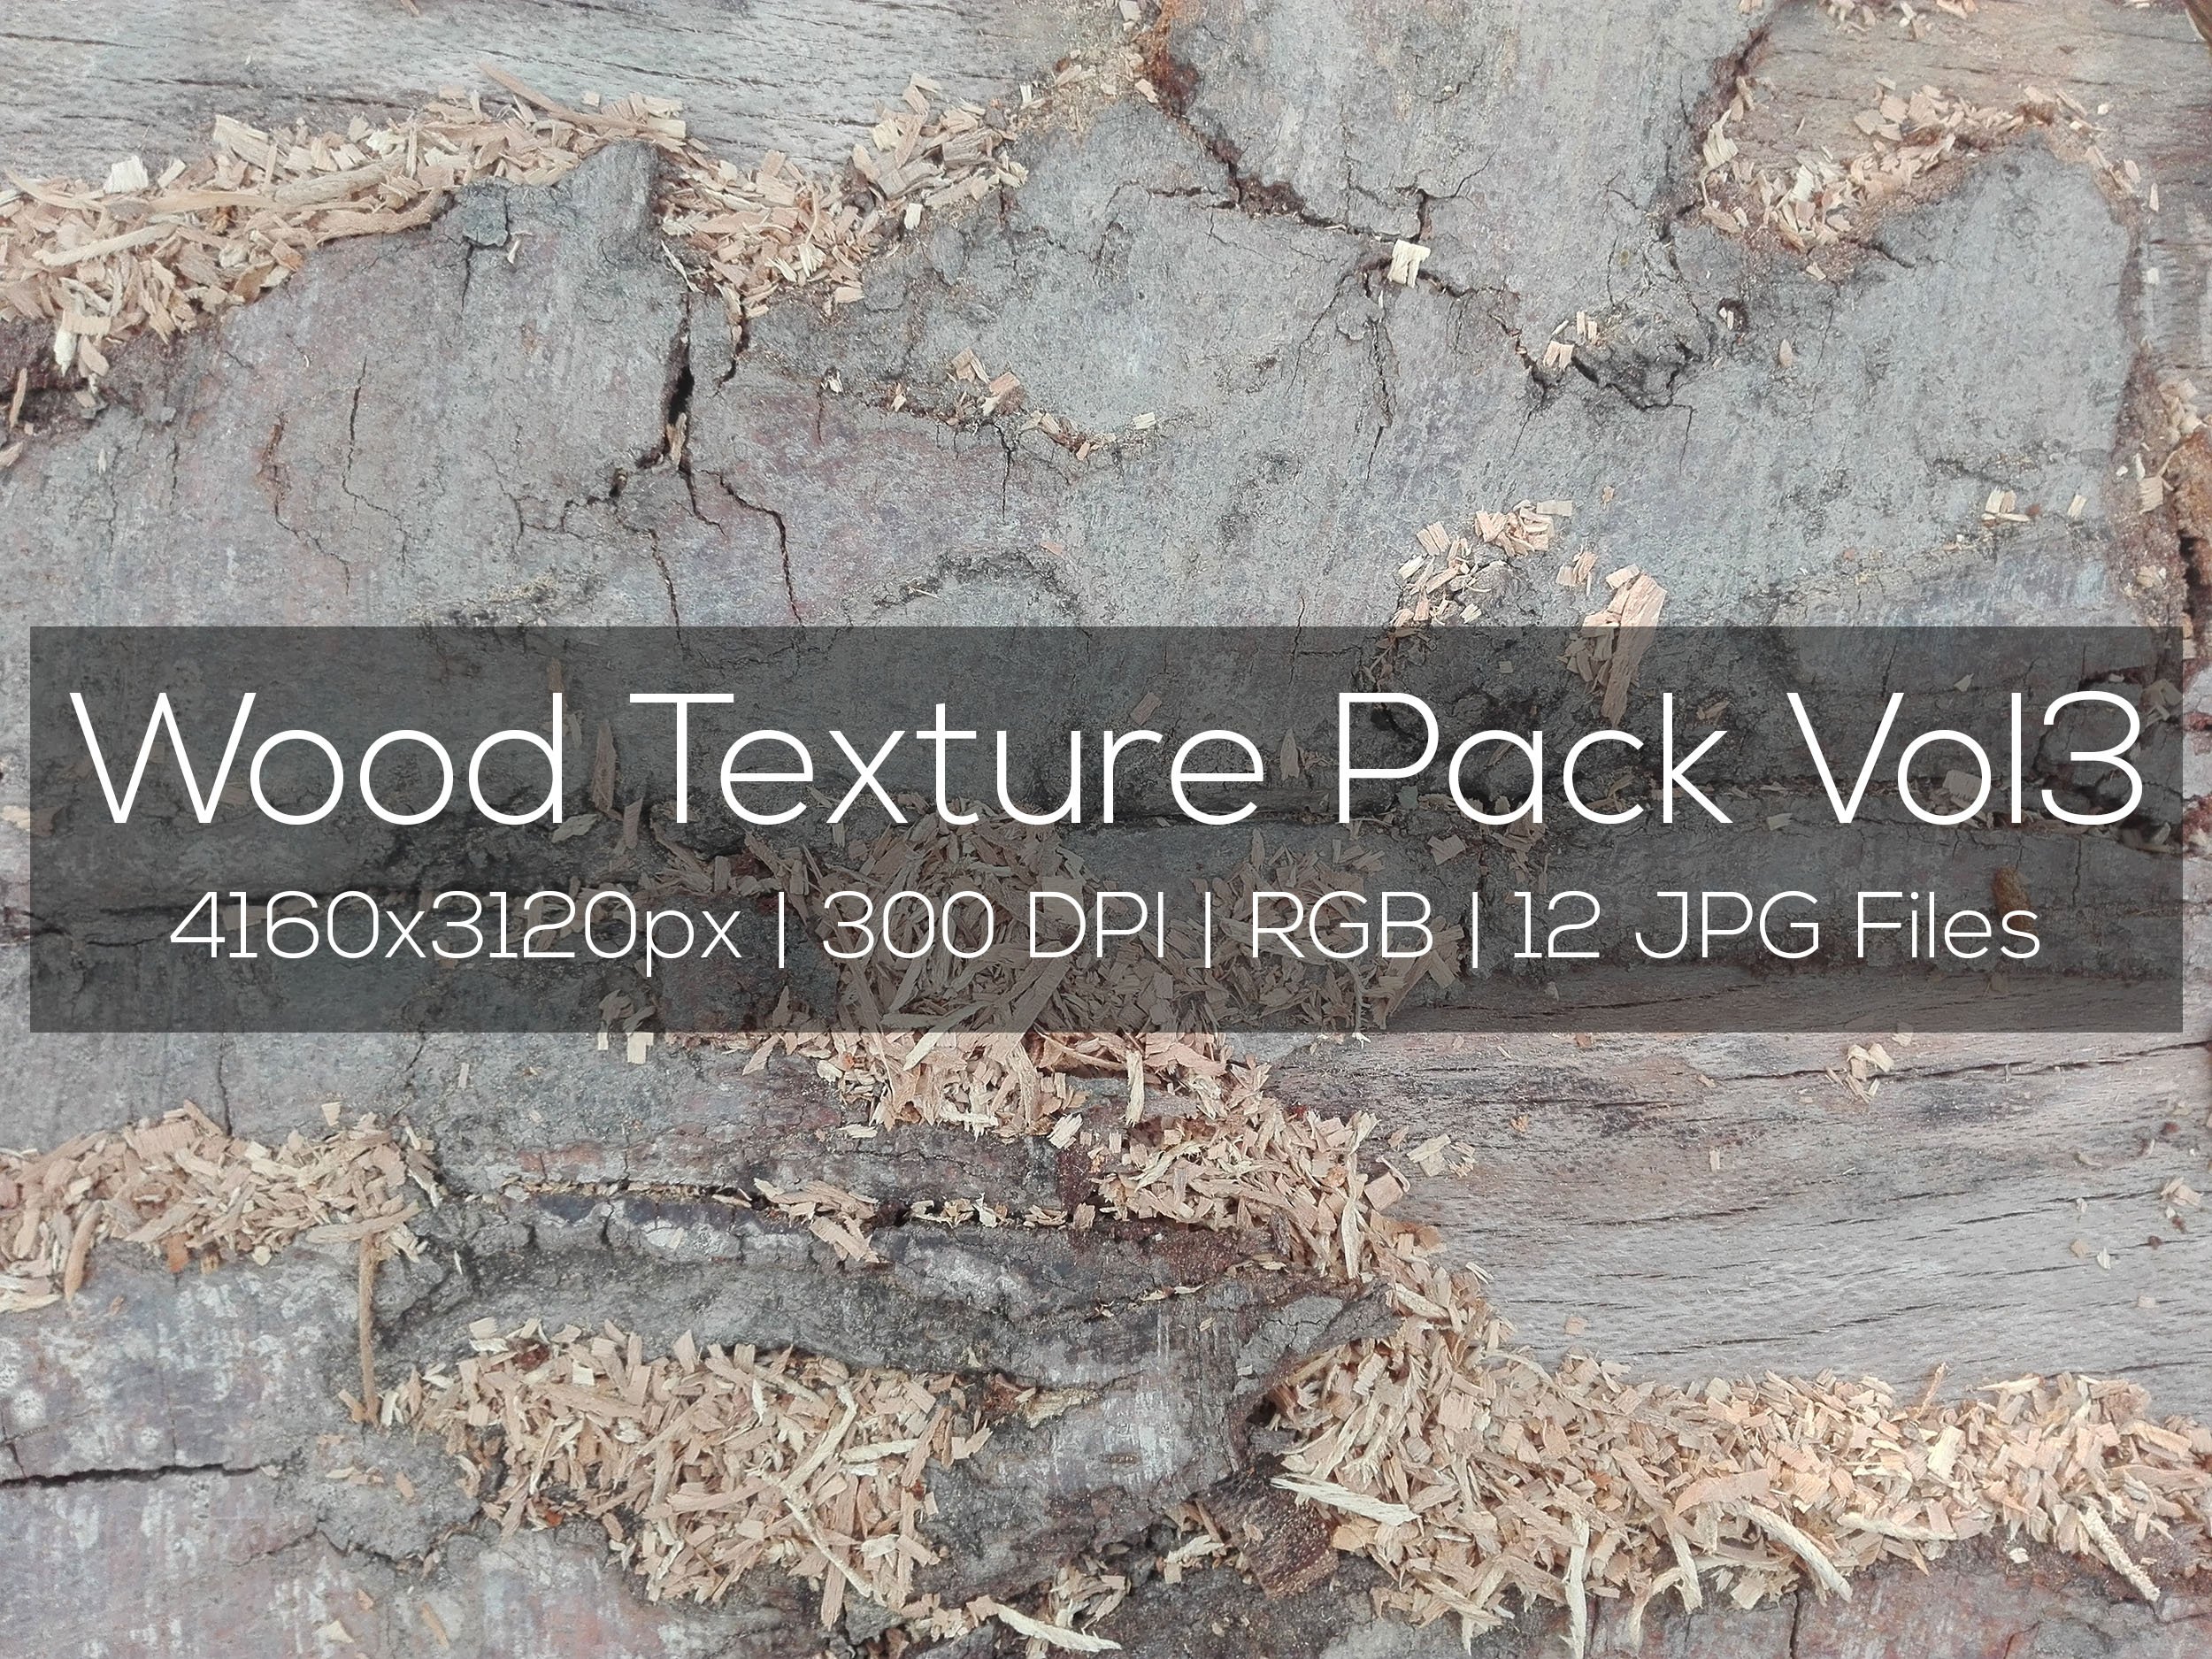 Wood Texture Pack Vol3 cover image.